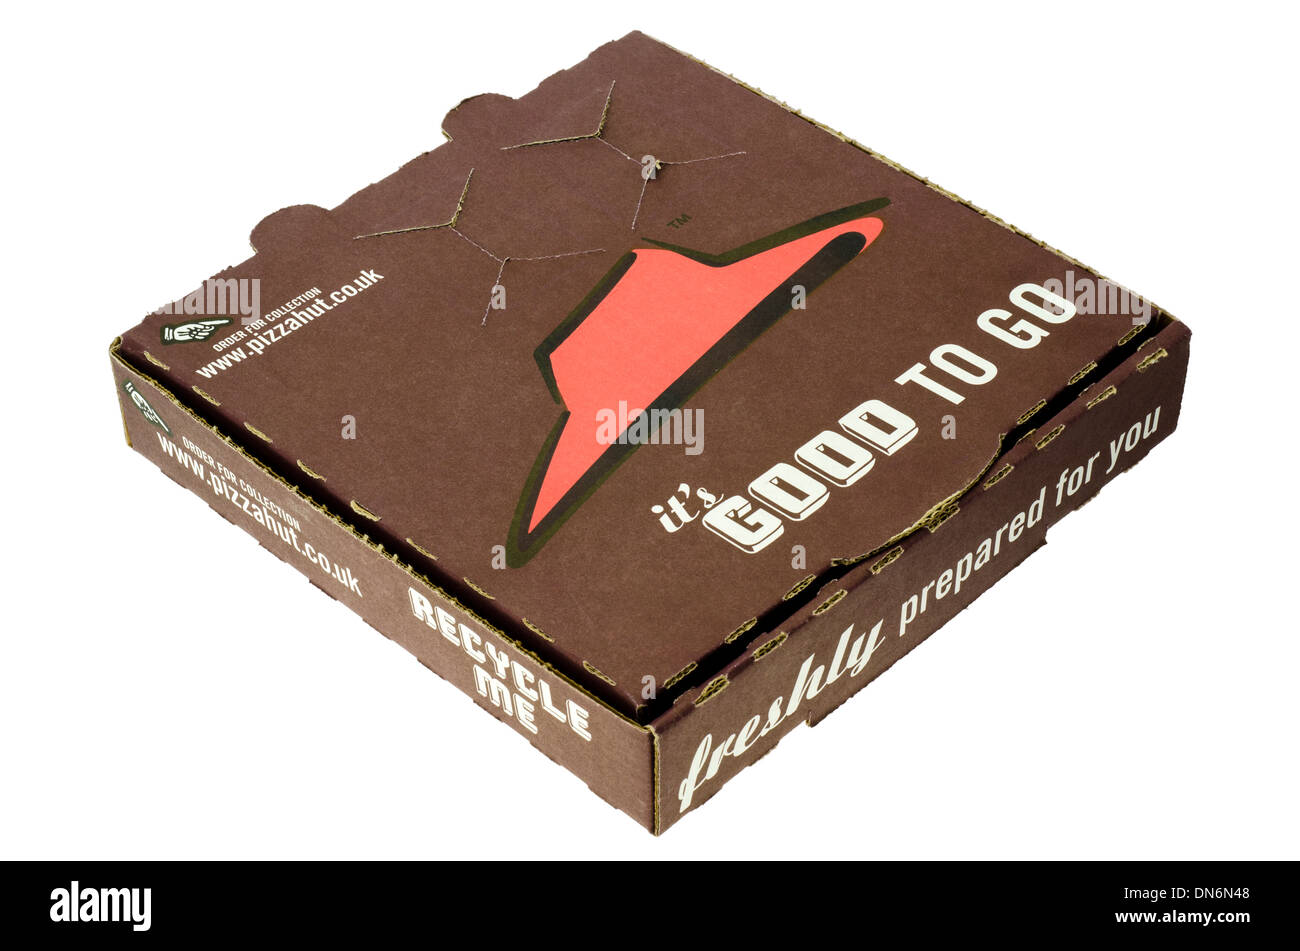 Pizza In A Box From Pizza Hut Restaurant Stock Photo - Download Image Now -  Box - Container, Pizza Hut, Cut Out - iStock